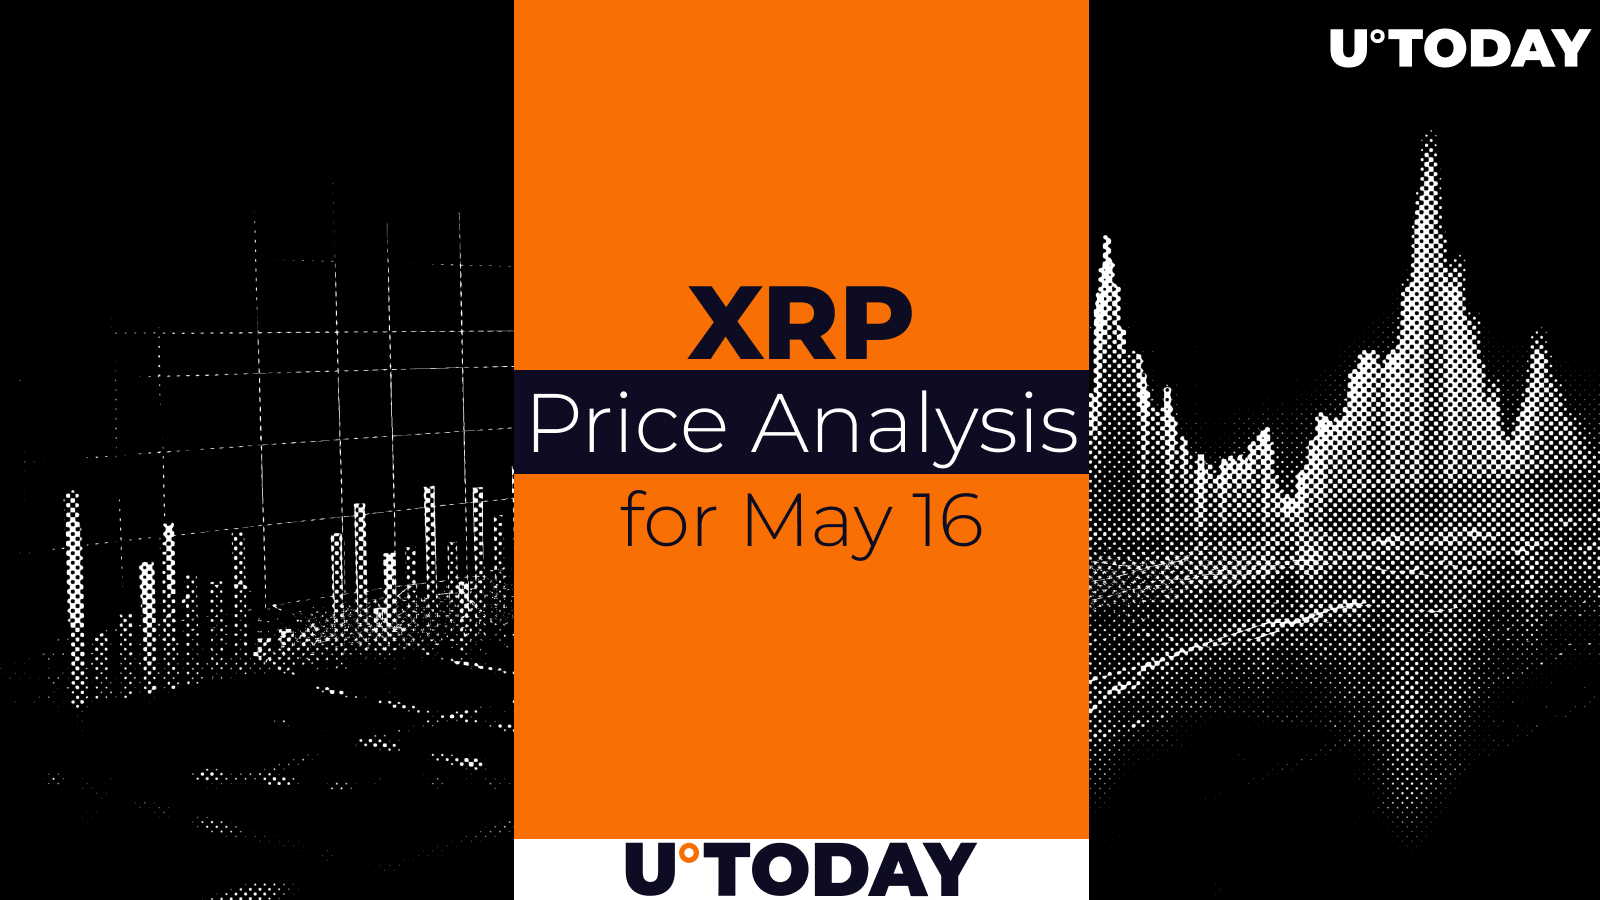 XRP Price Prediction for May 16